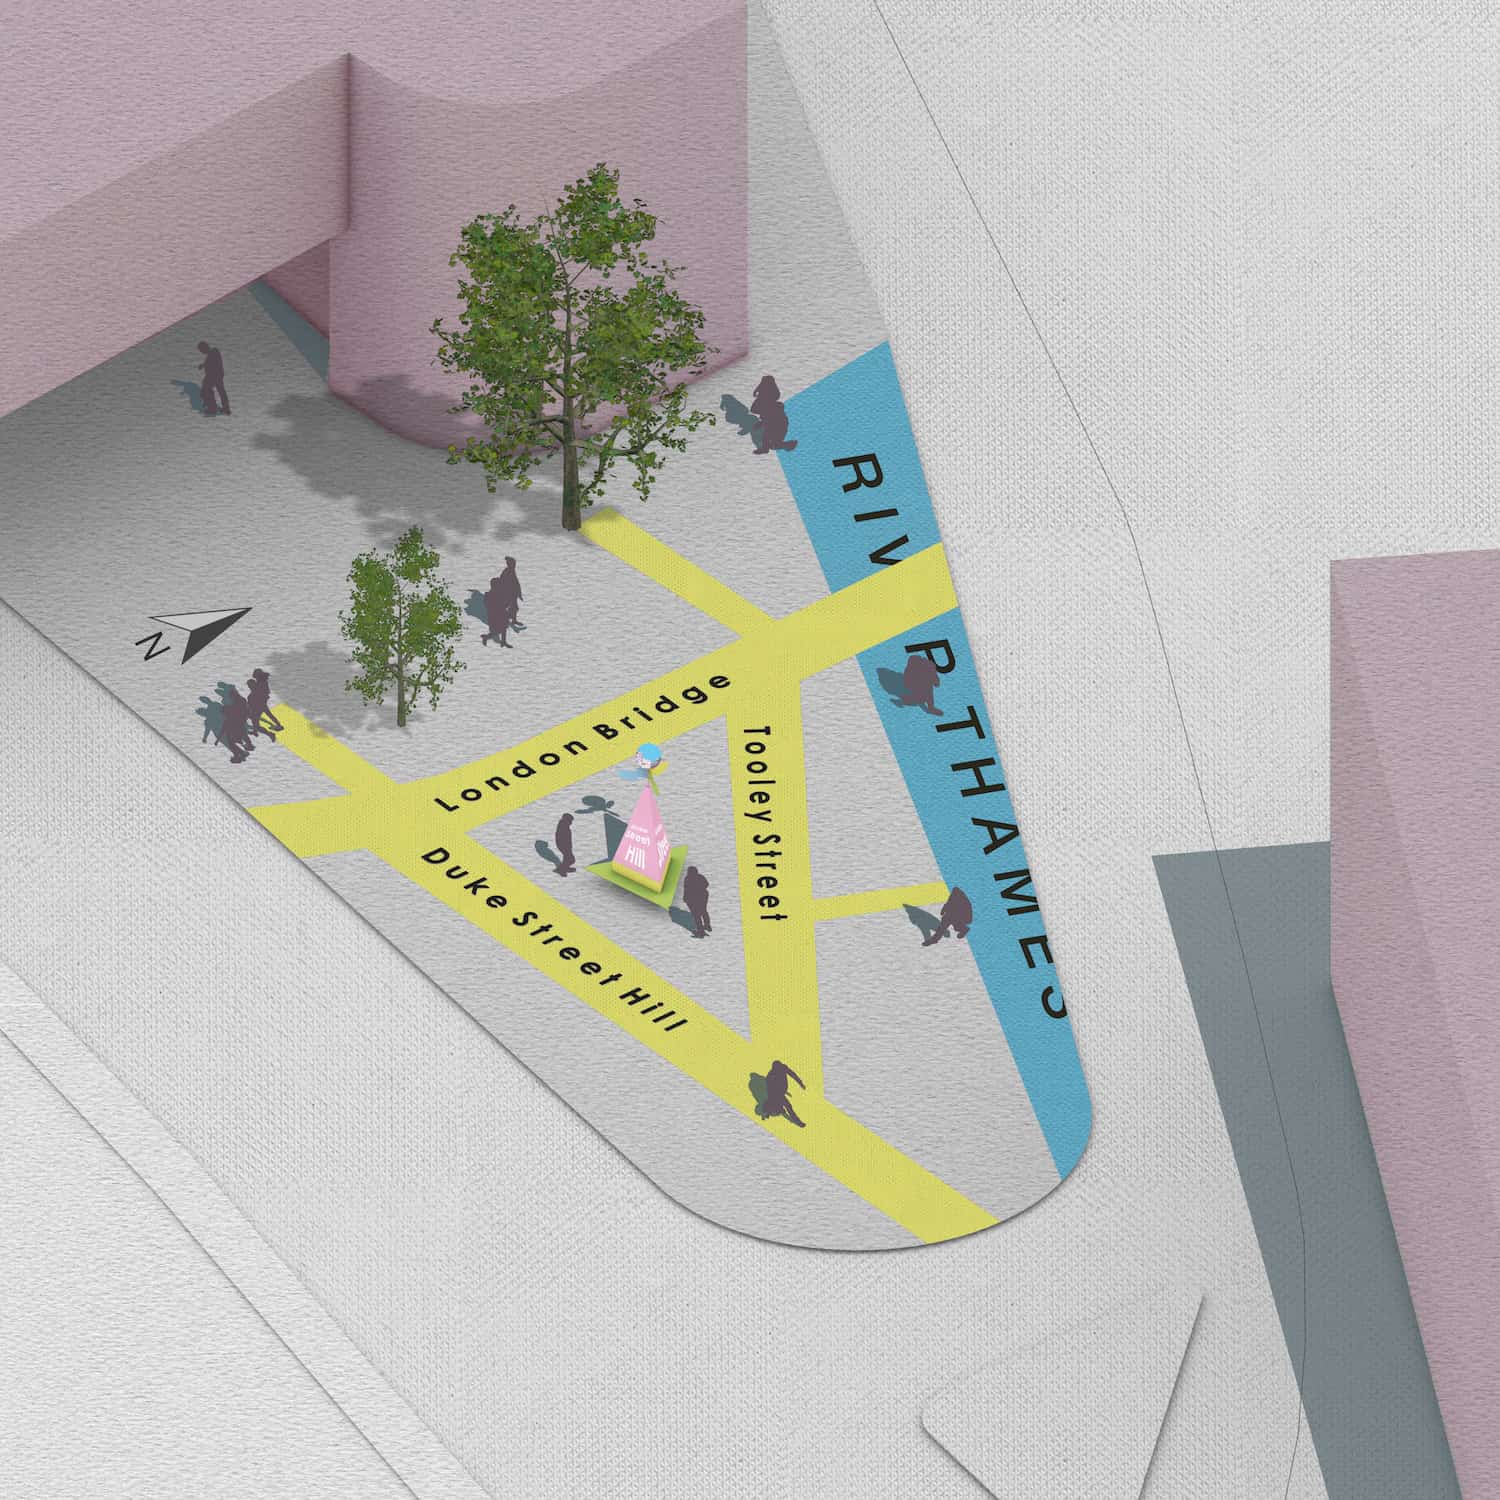 Charles Holland Architects win London Bridge public realm competition